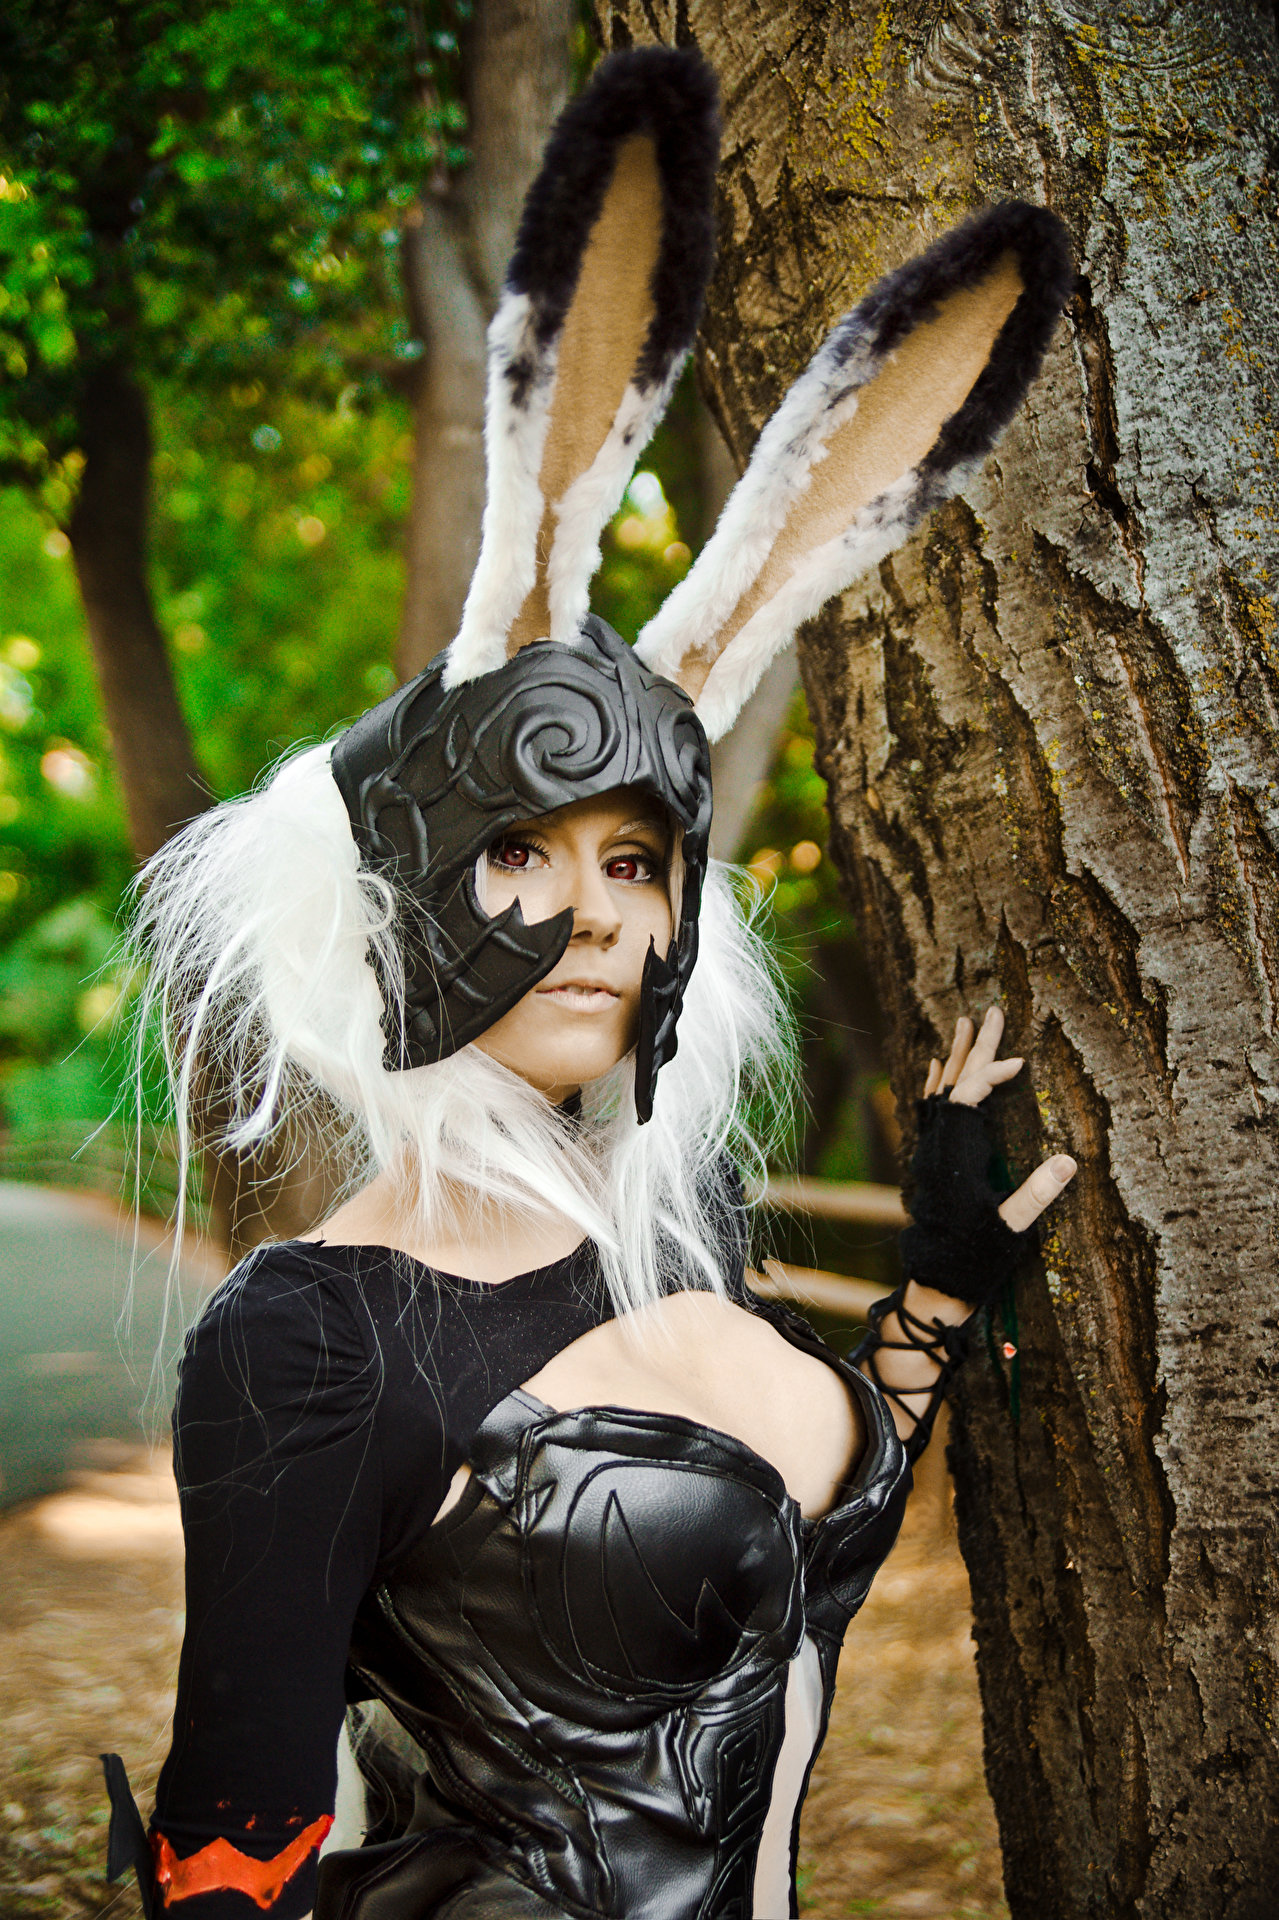 Cospix.net photo featuring Adel Cosplay